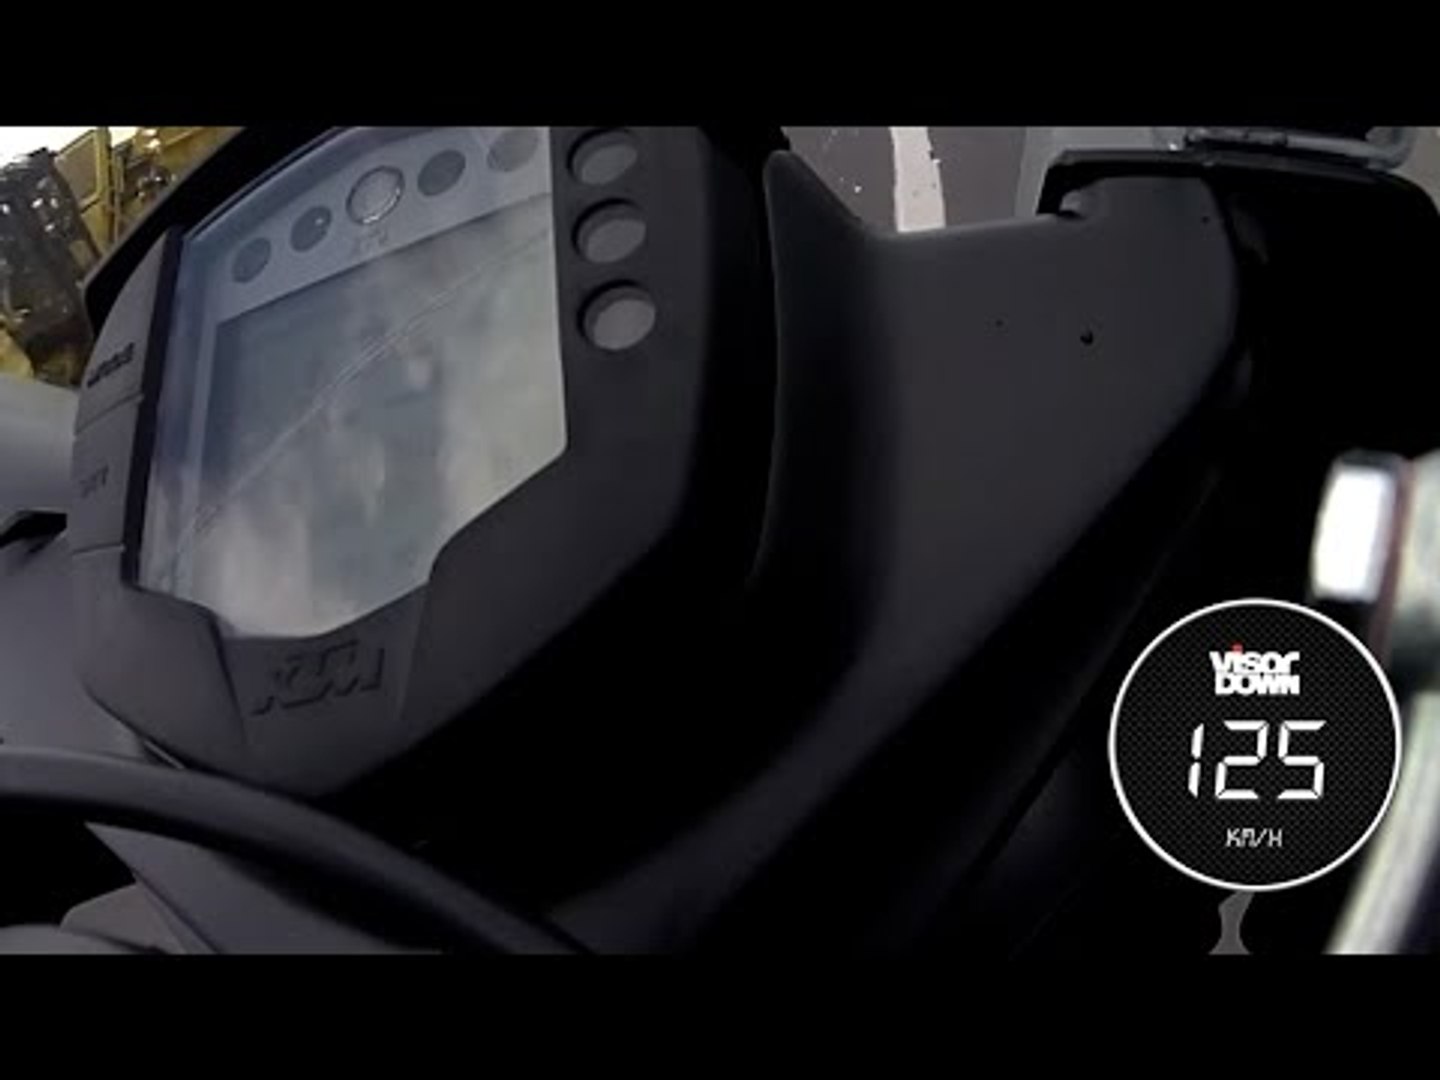 KTM RC 125 - Top Speed - 125km/h - video Dailymotion